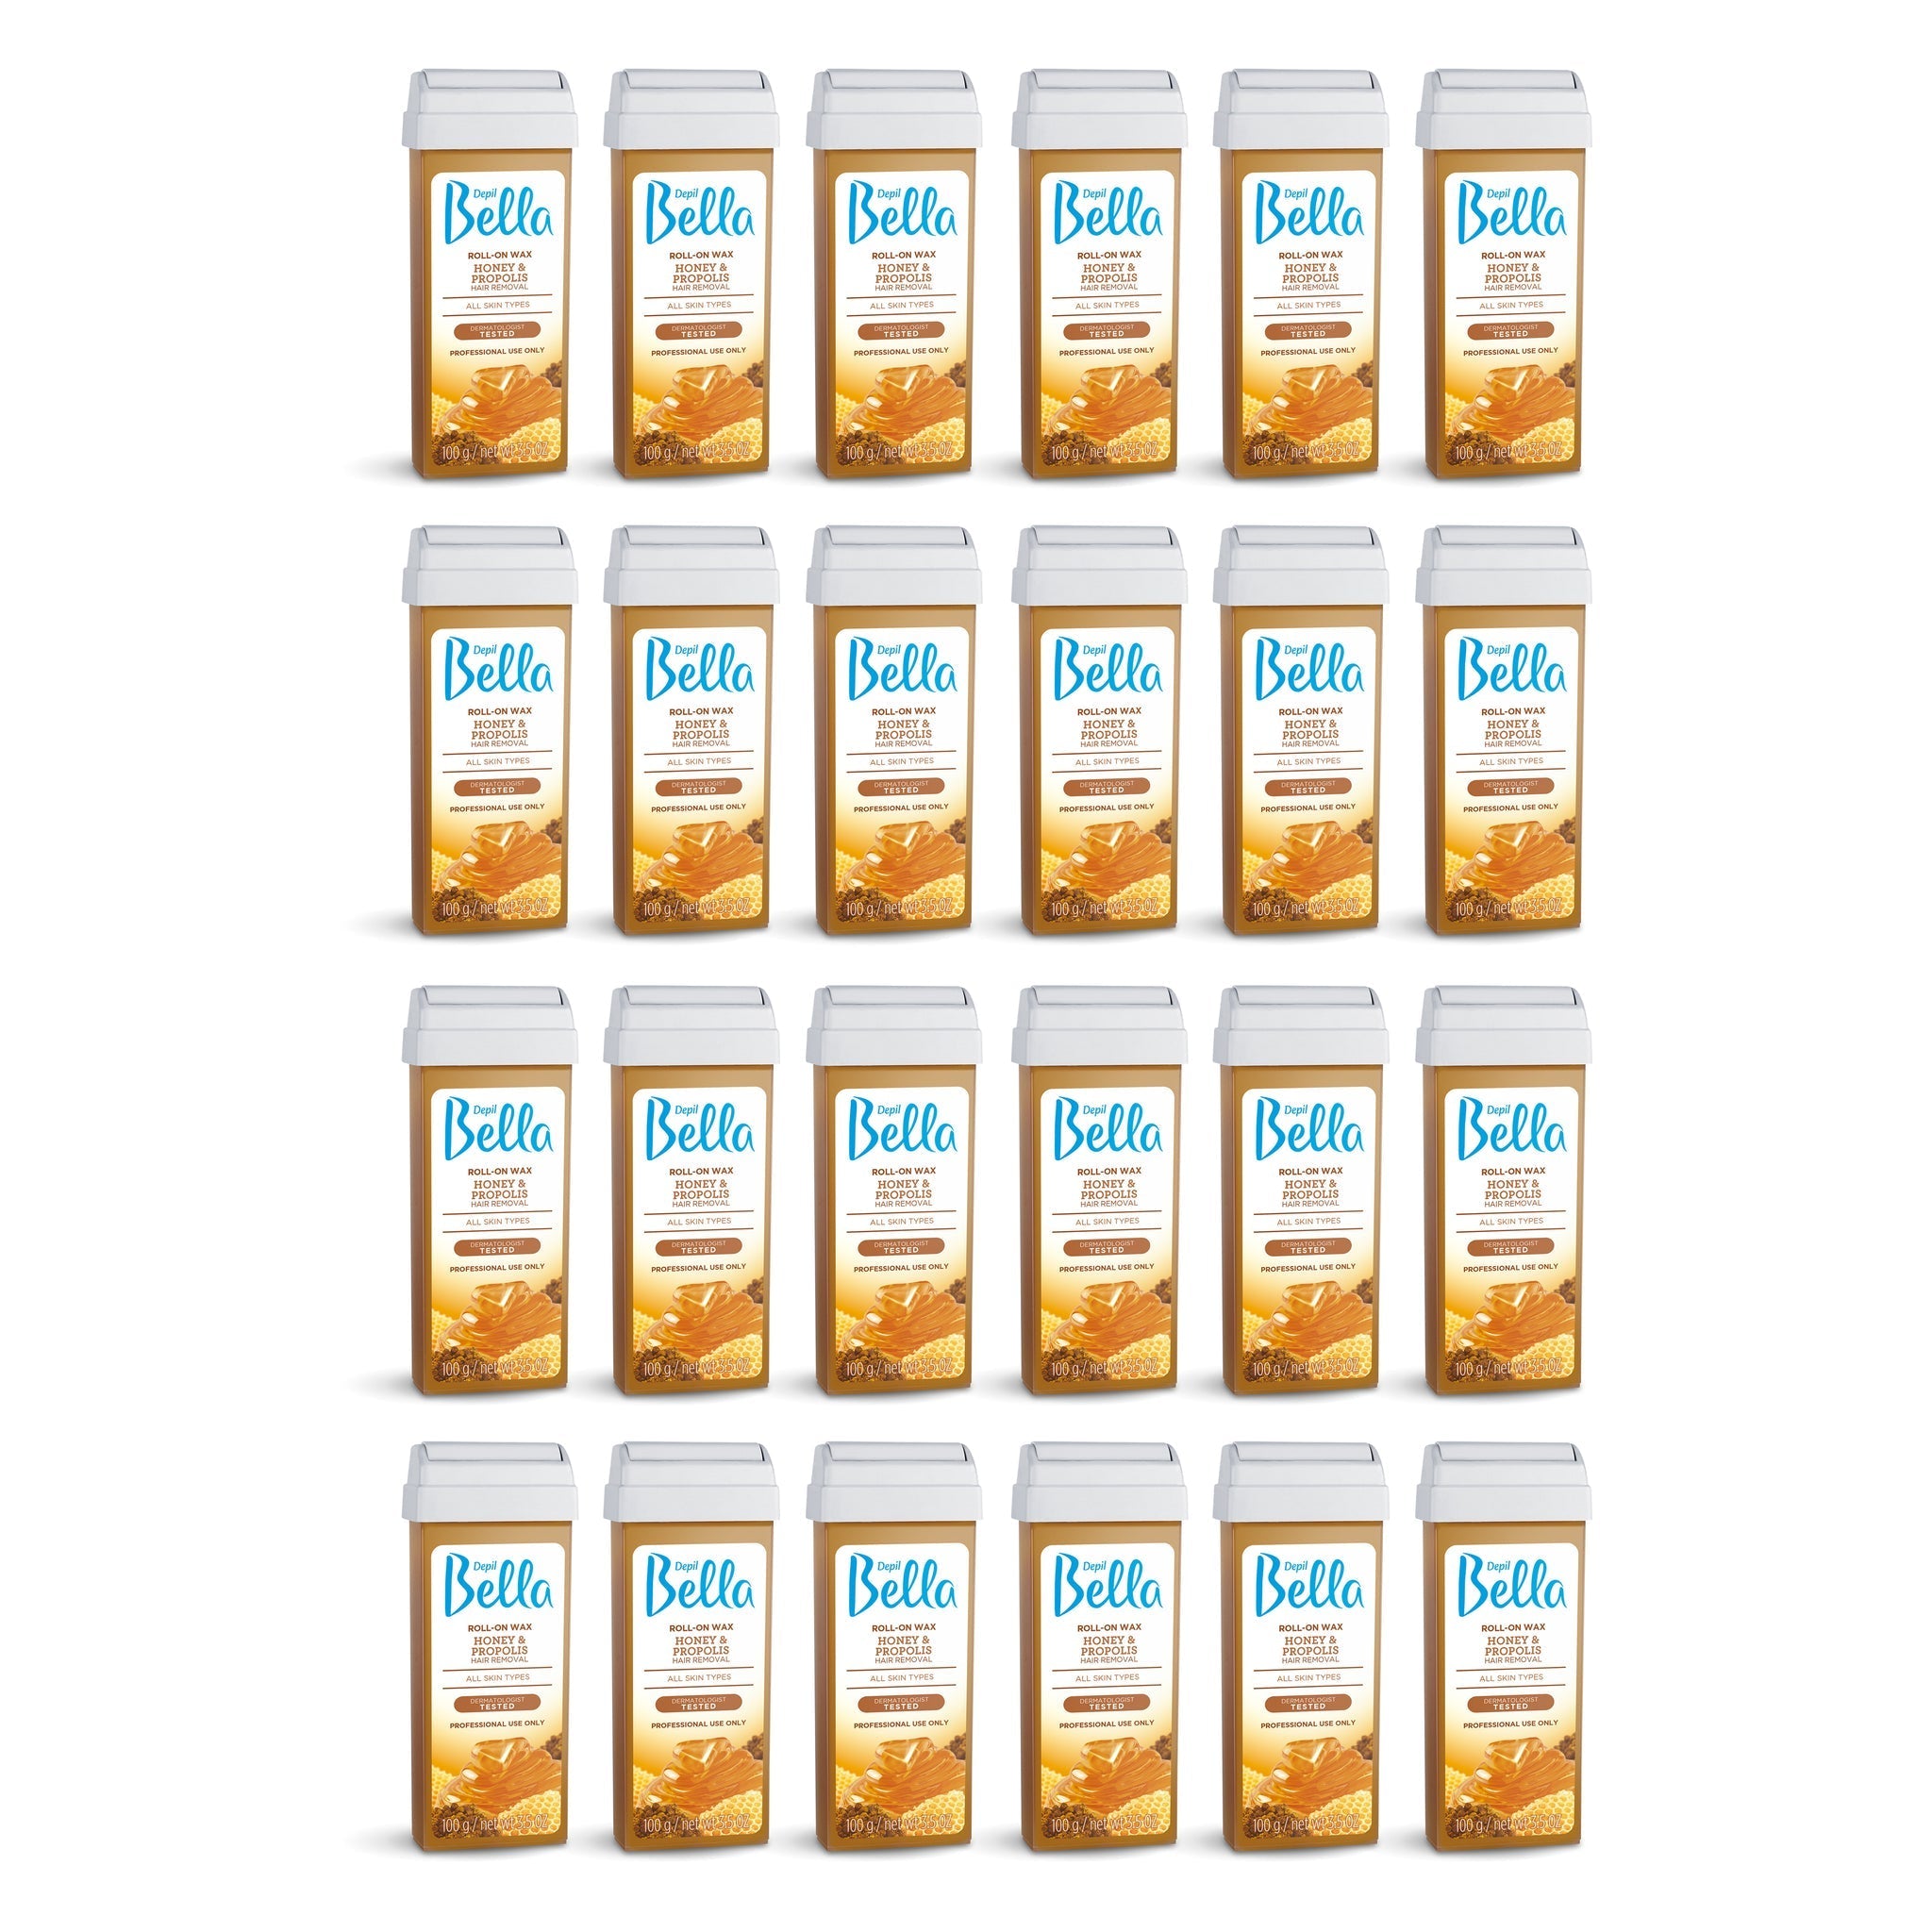 Depil Bella Hair Removal Wax Depil Bella Roll-On Honey with Propolis Wax Hair Removal Cartridges 3.52Oz (24 Units )